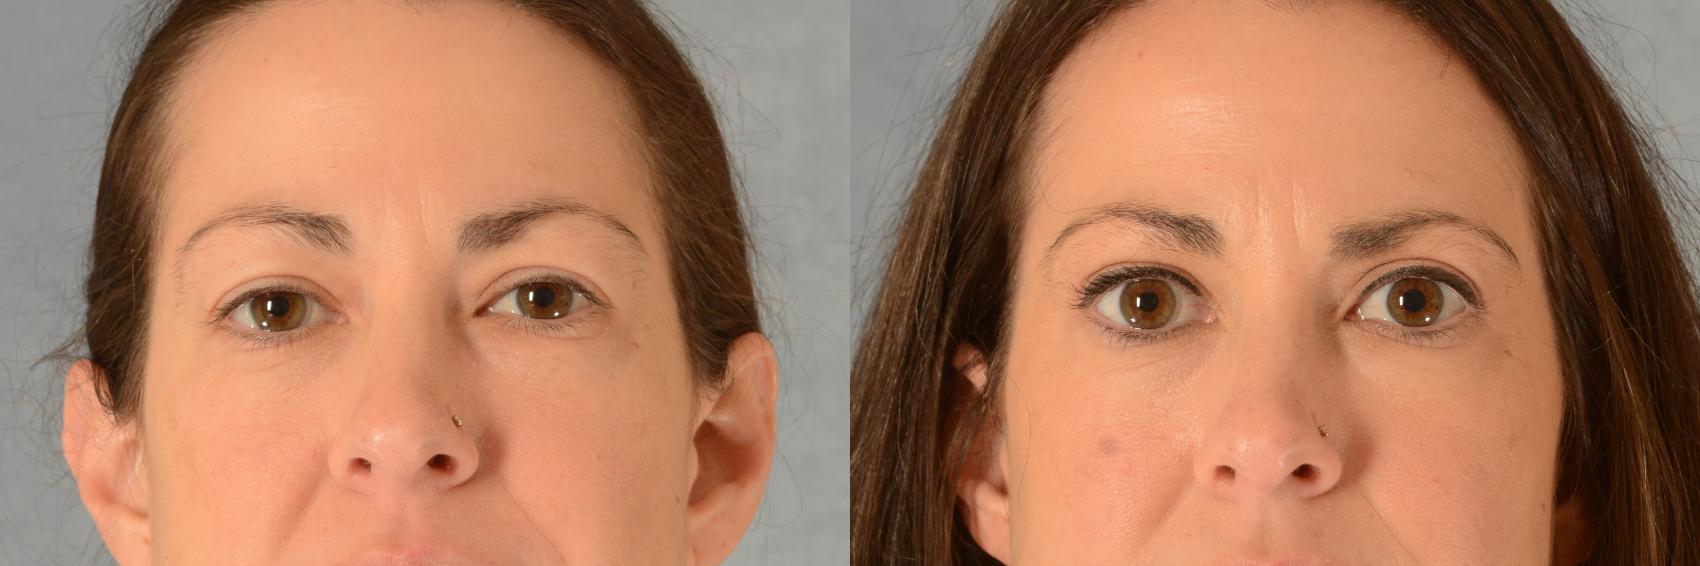 Before & After Eyelid Surgery (Blepharoplasty) Case 511 Front View in Tallahassee, FL